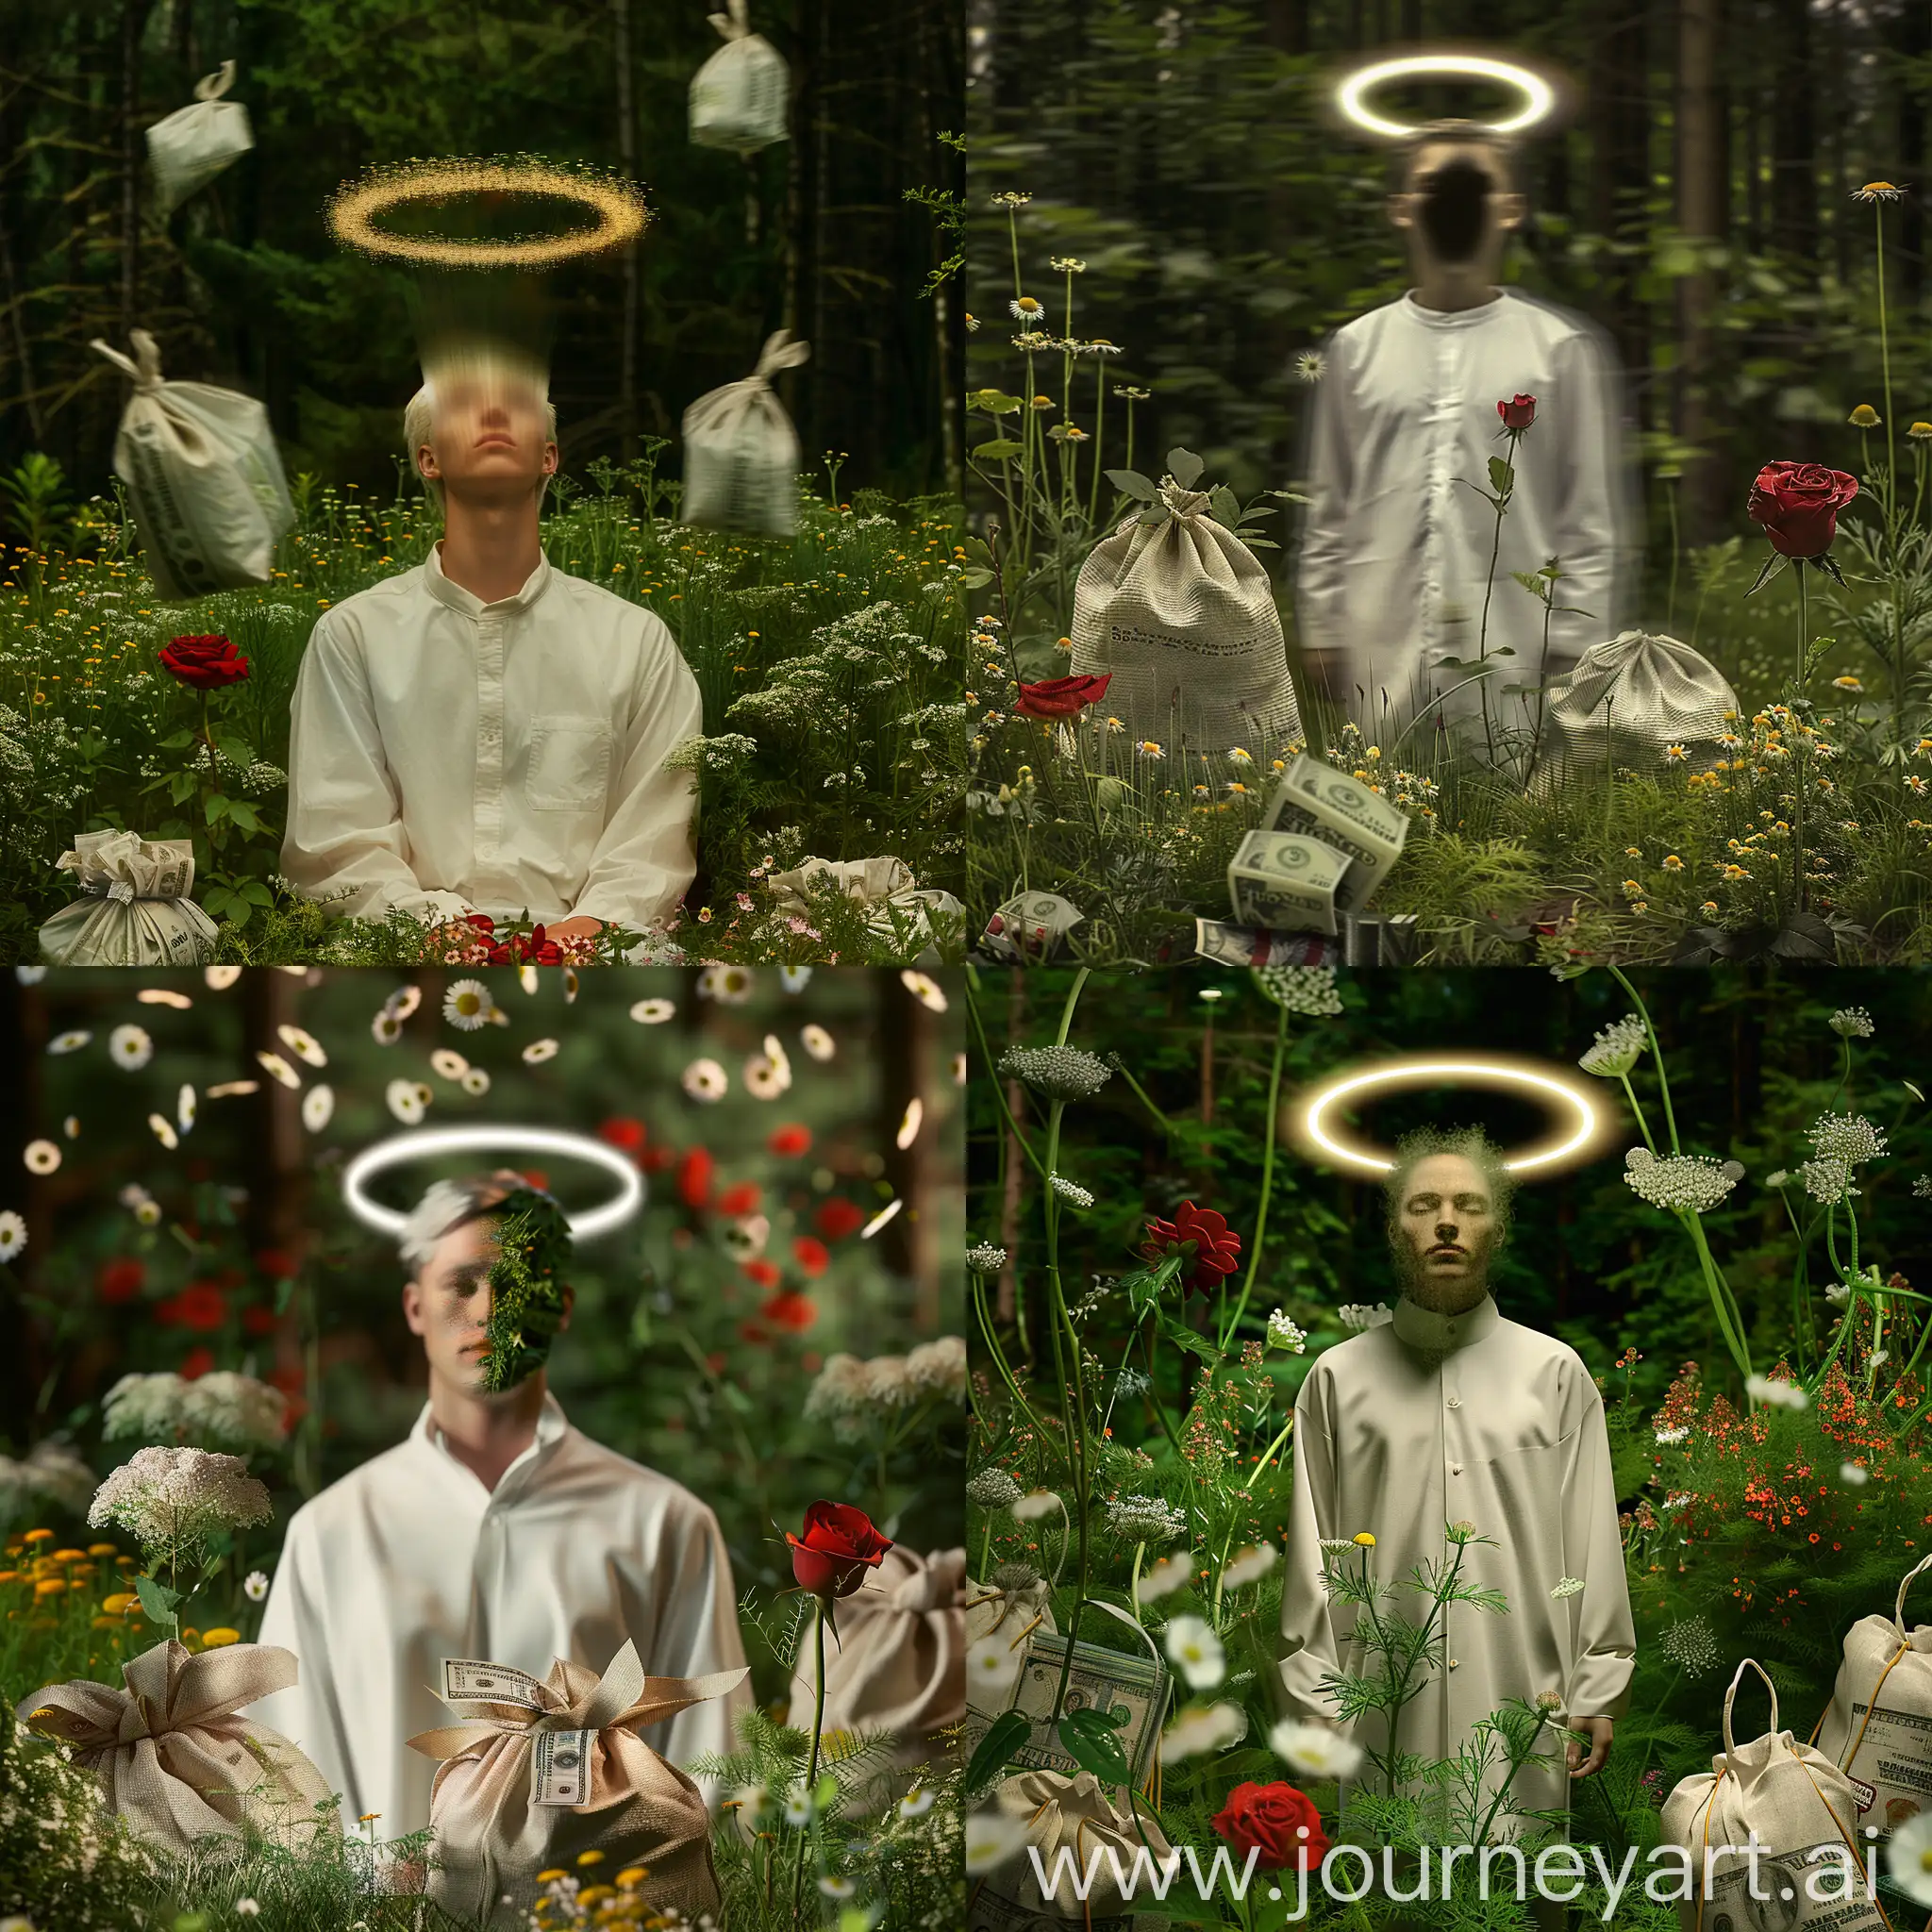 Mysterious-Figure-in-Heavenly-Halo-Amidst-Lush-Forest-with-Wealth-and-Flowers